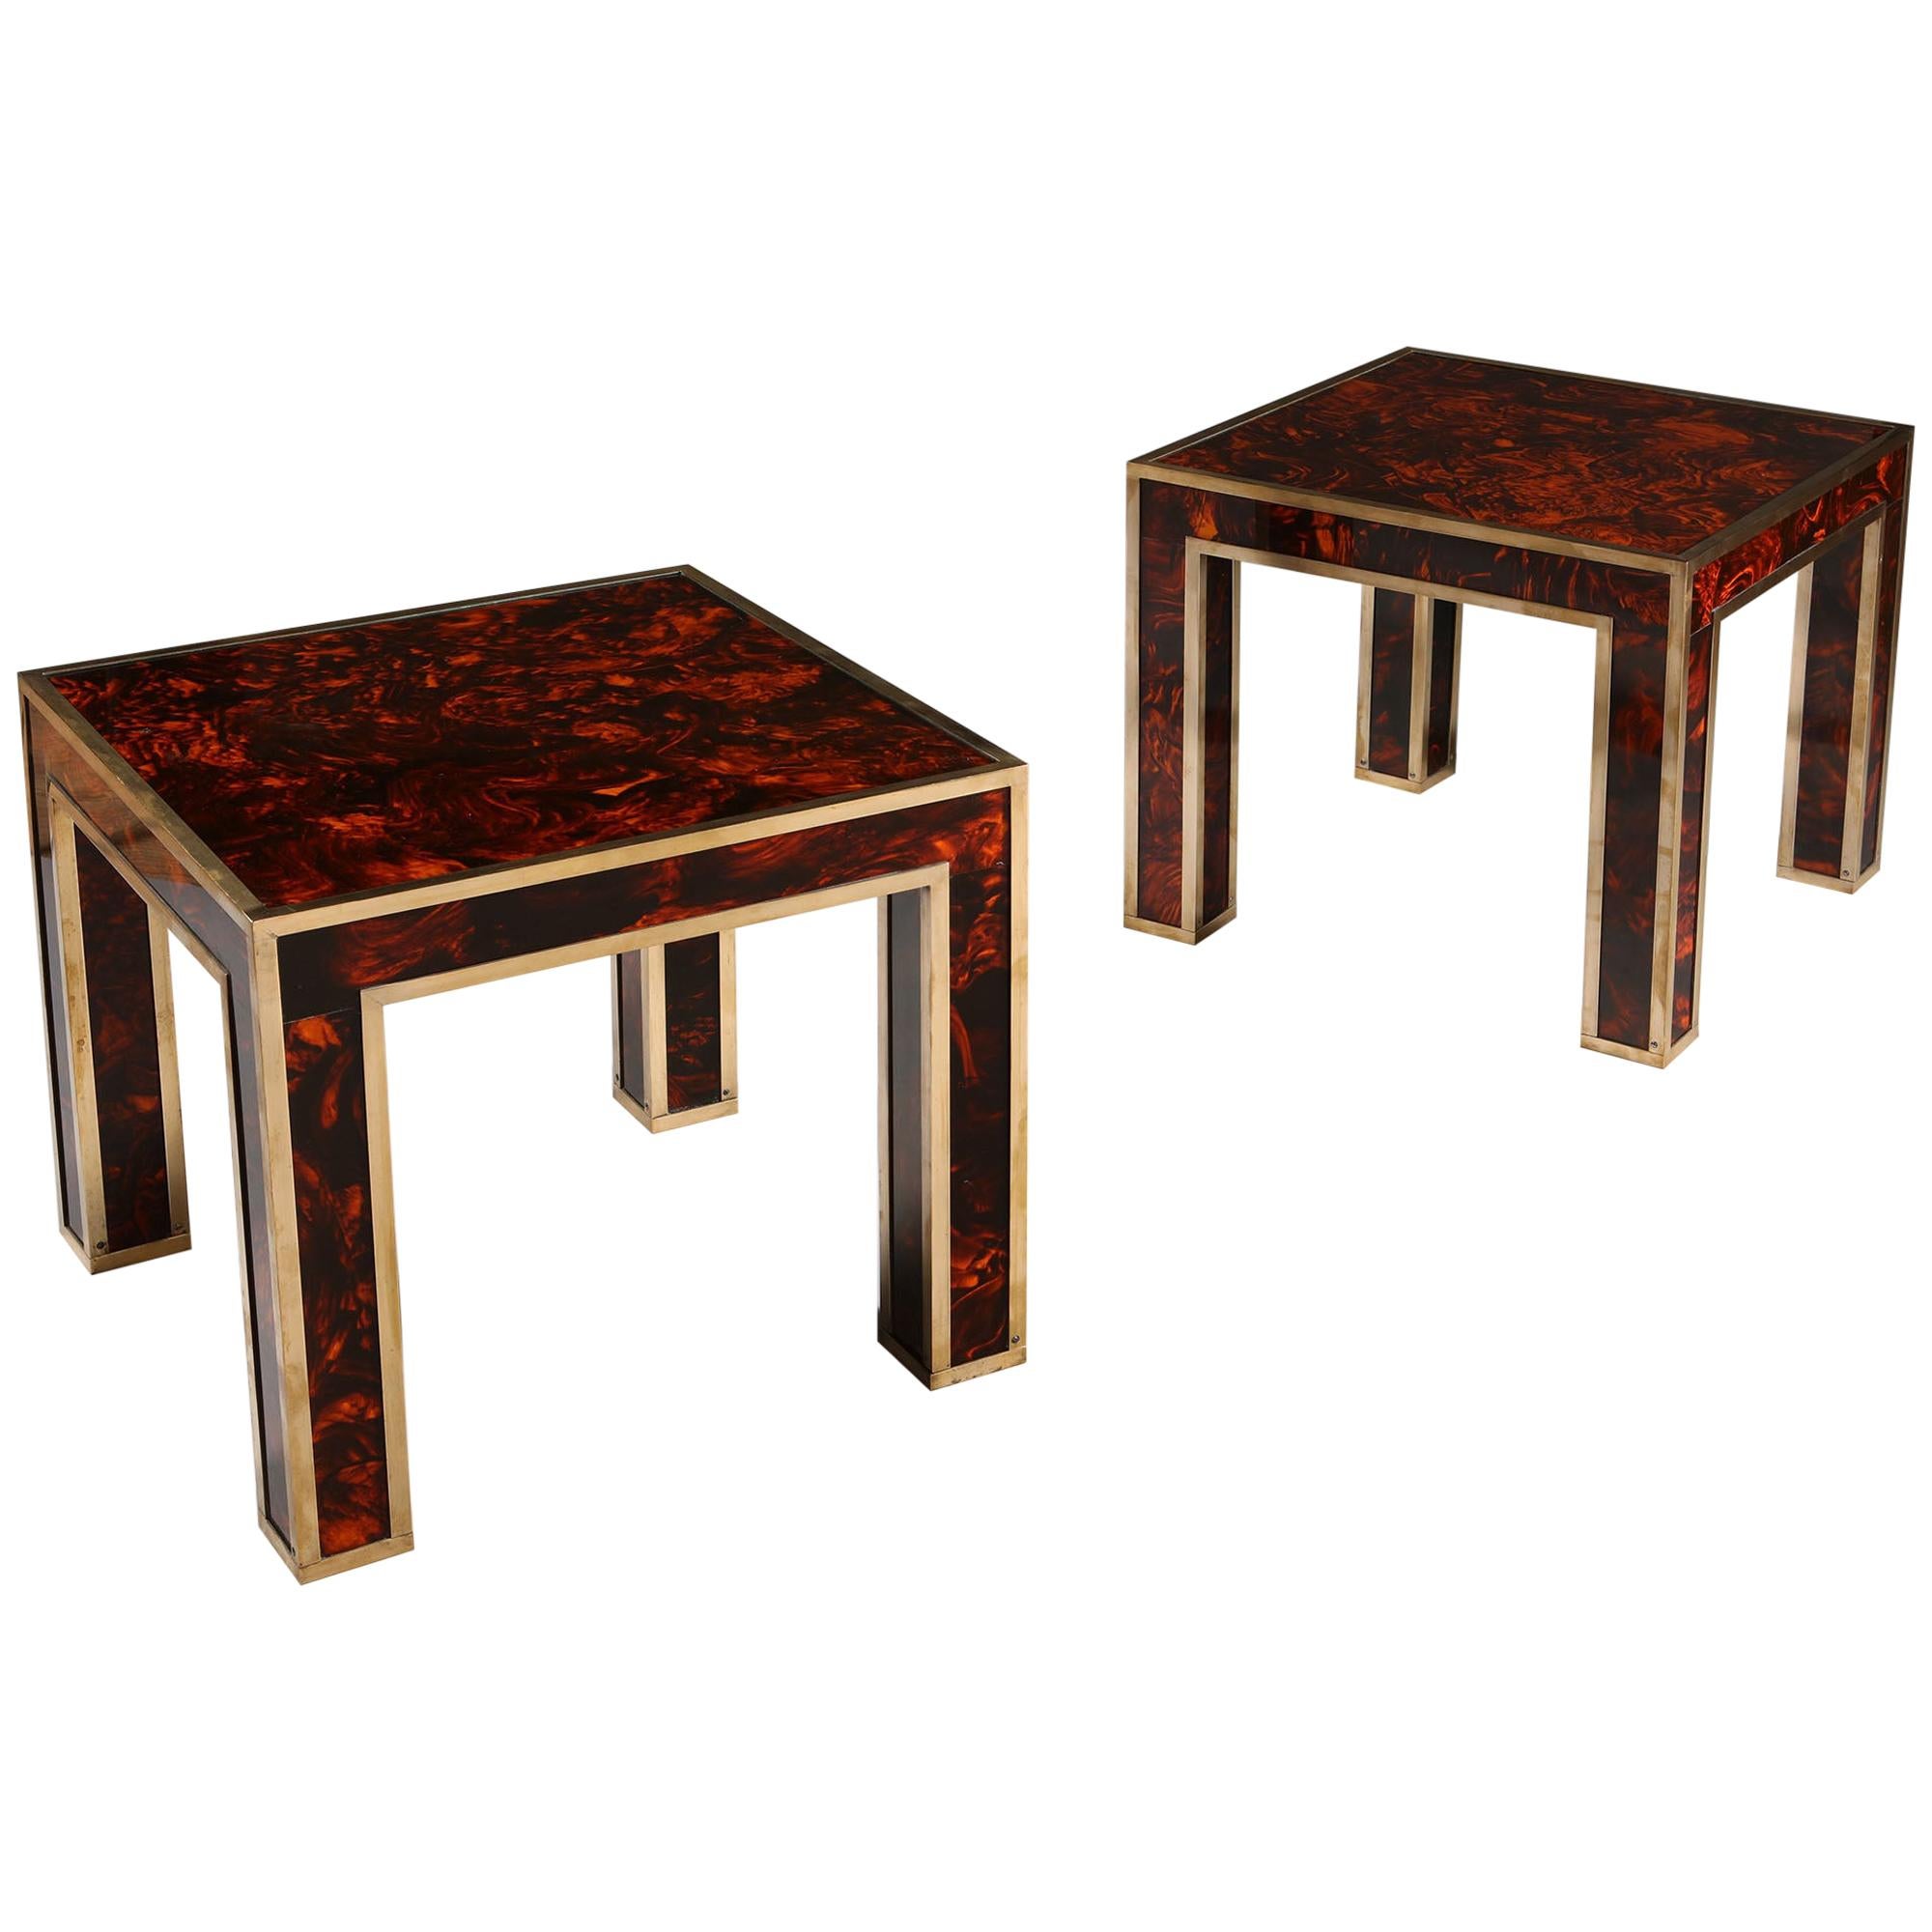 Pair of 1960s Faux Tortoiseshell Occasional Tables after Maison Jansen